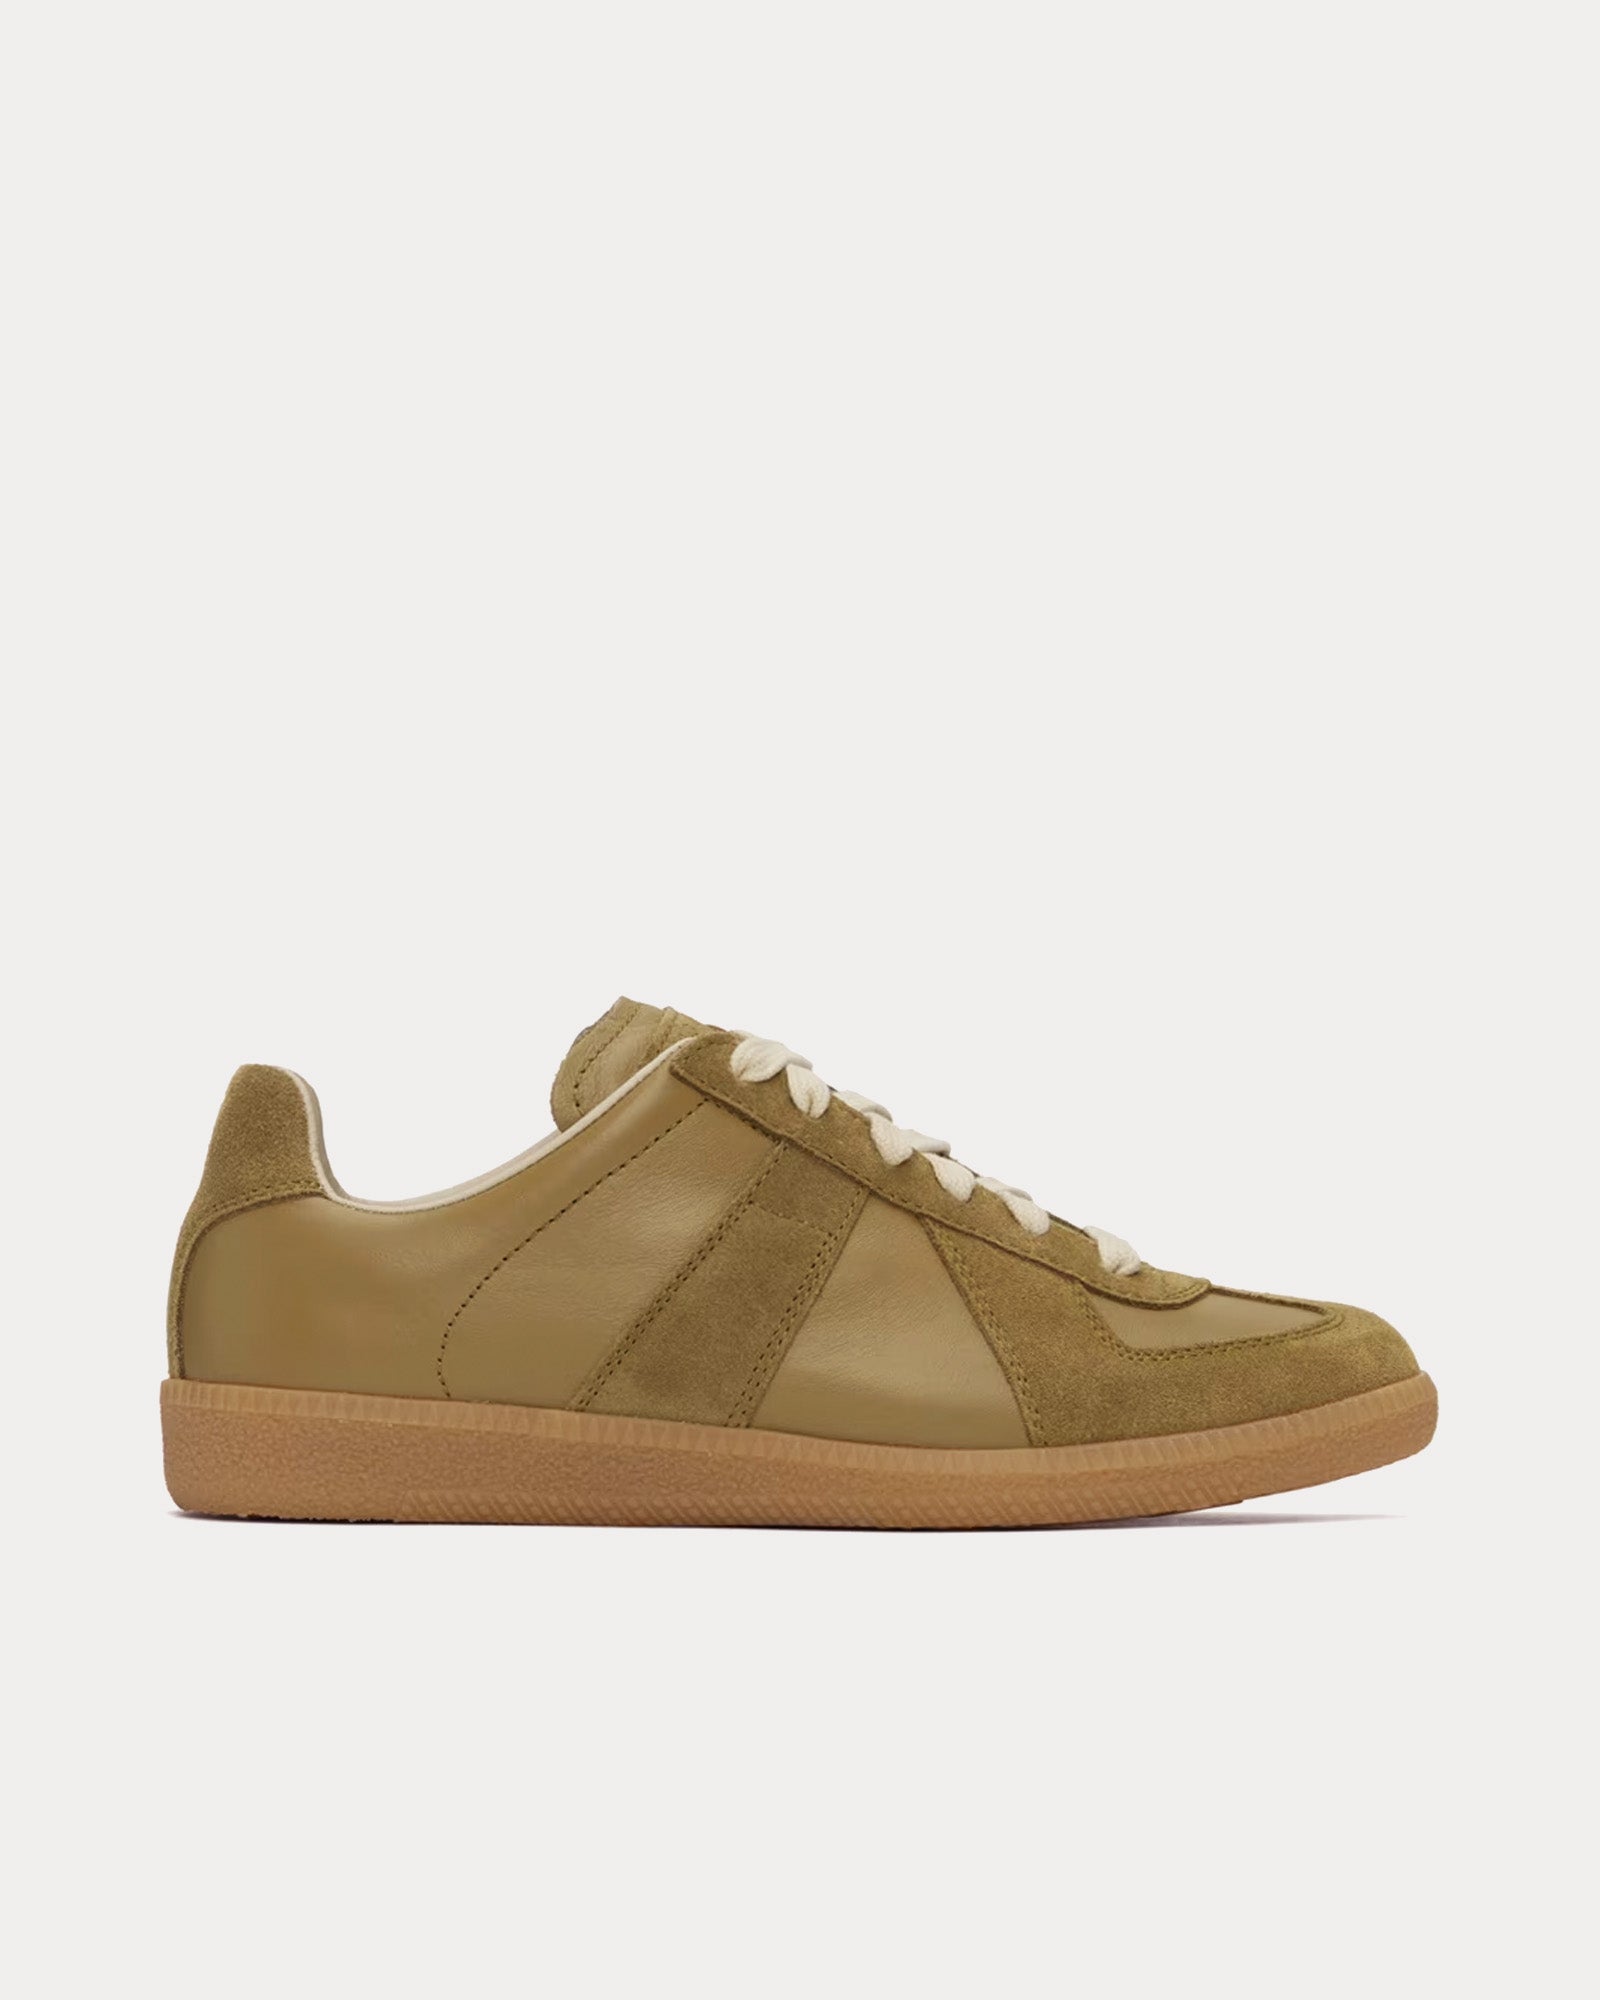 Maison Margiela - Replica Leather Swamp Low Top Sneakers